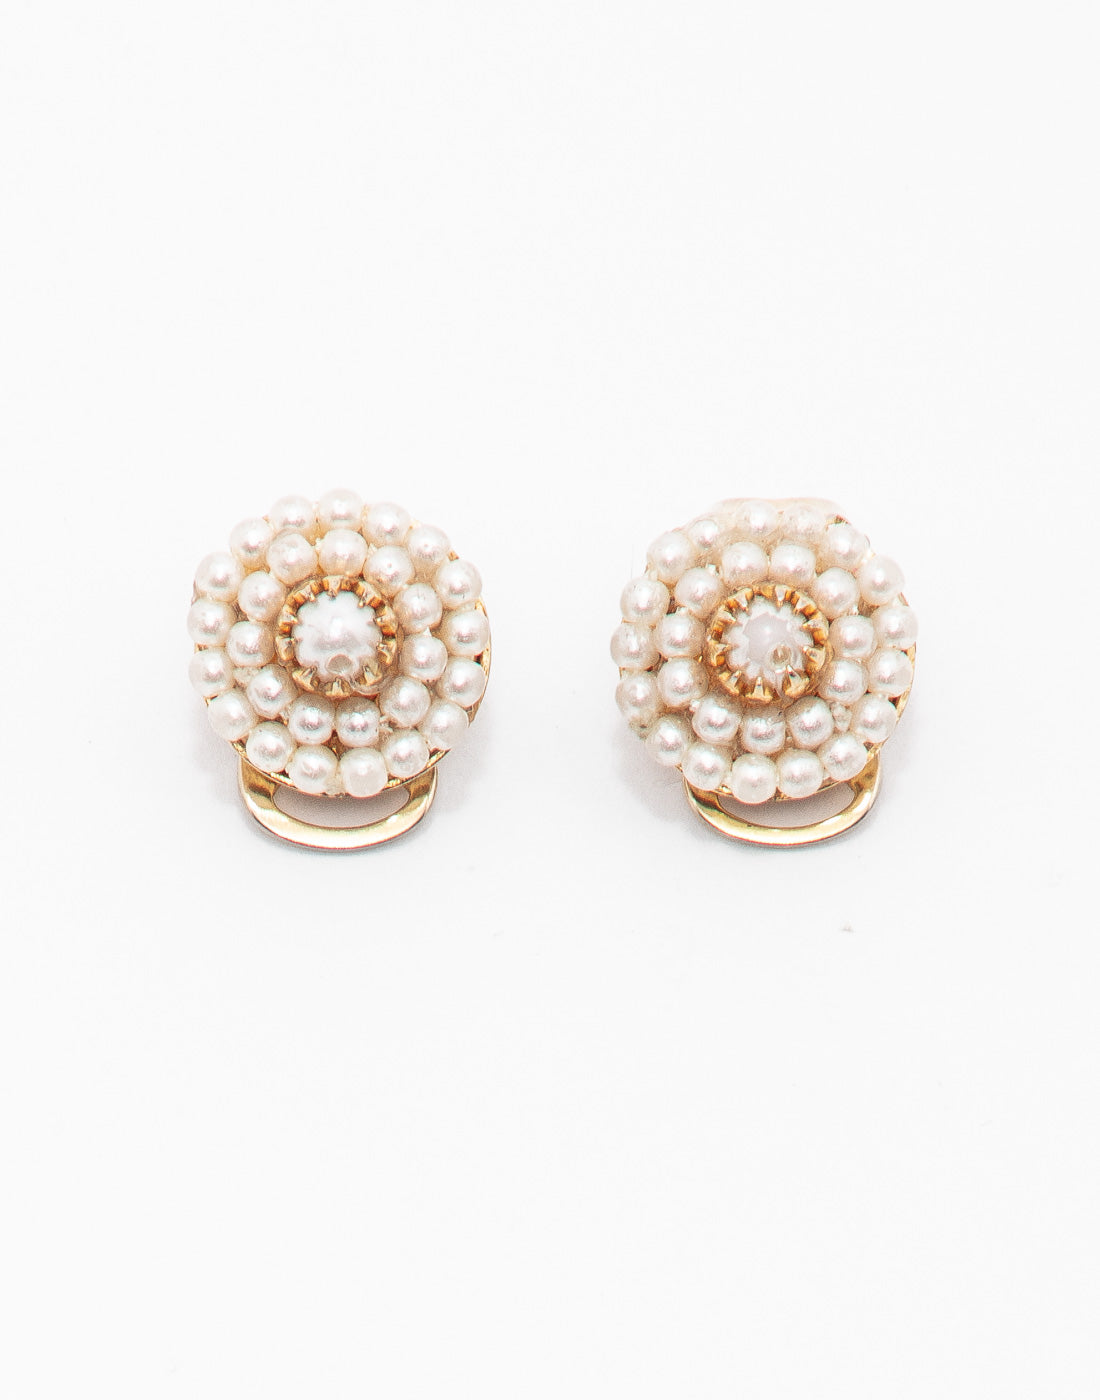 Vintage small clip-on earrings composed of a detail with many pearls